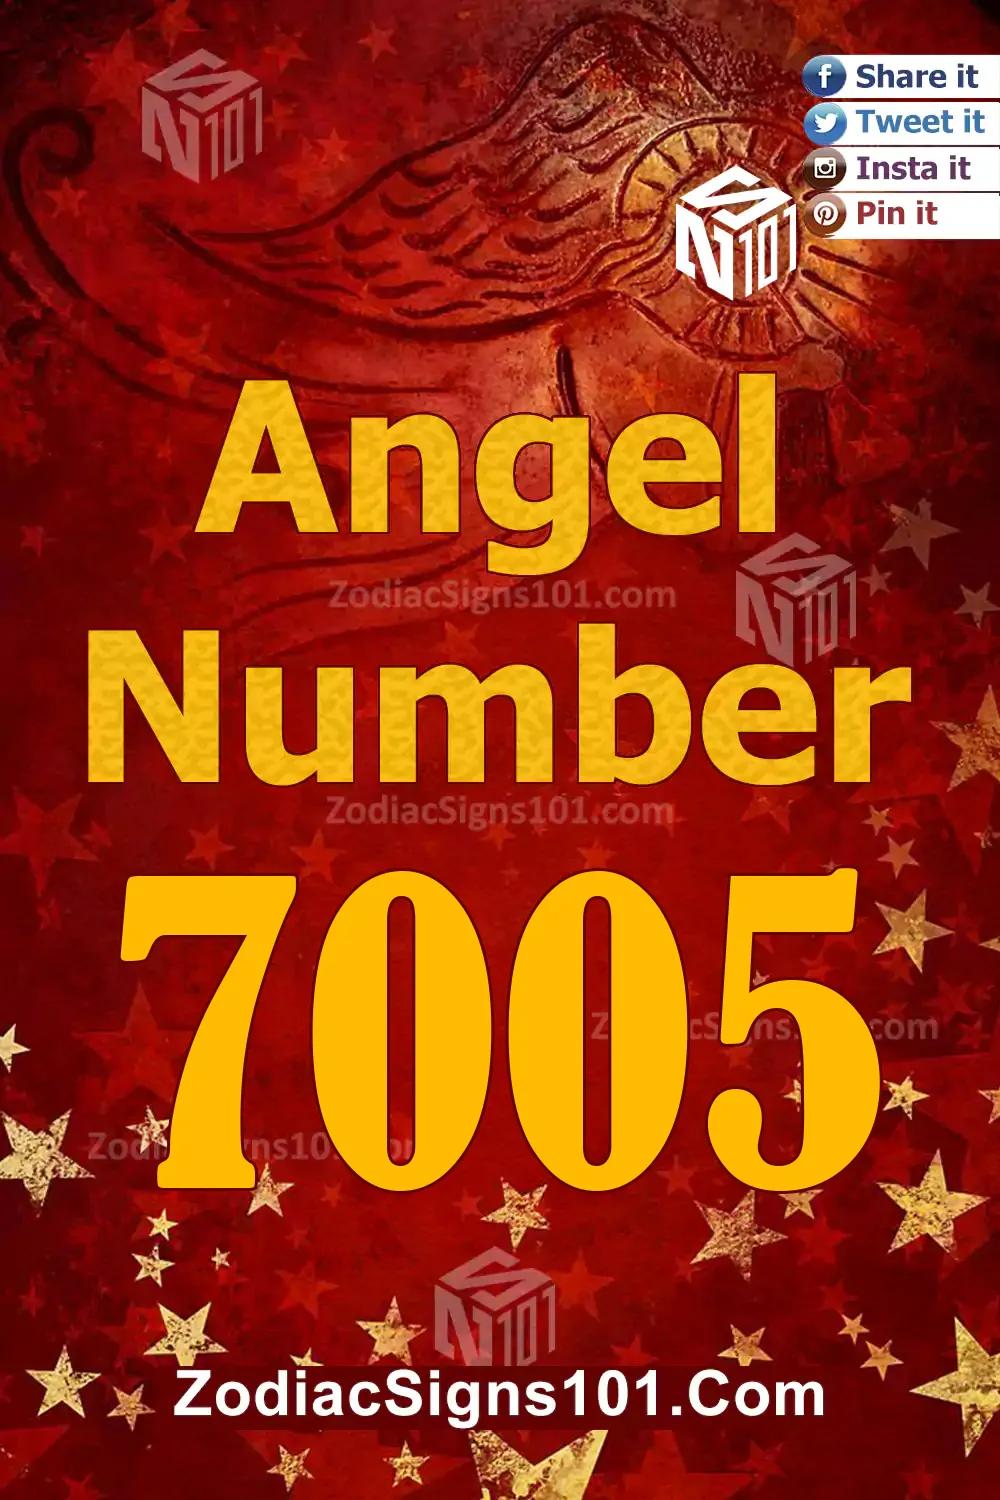 7005 Angel Number Meaning